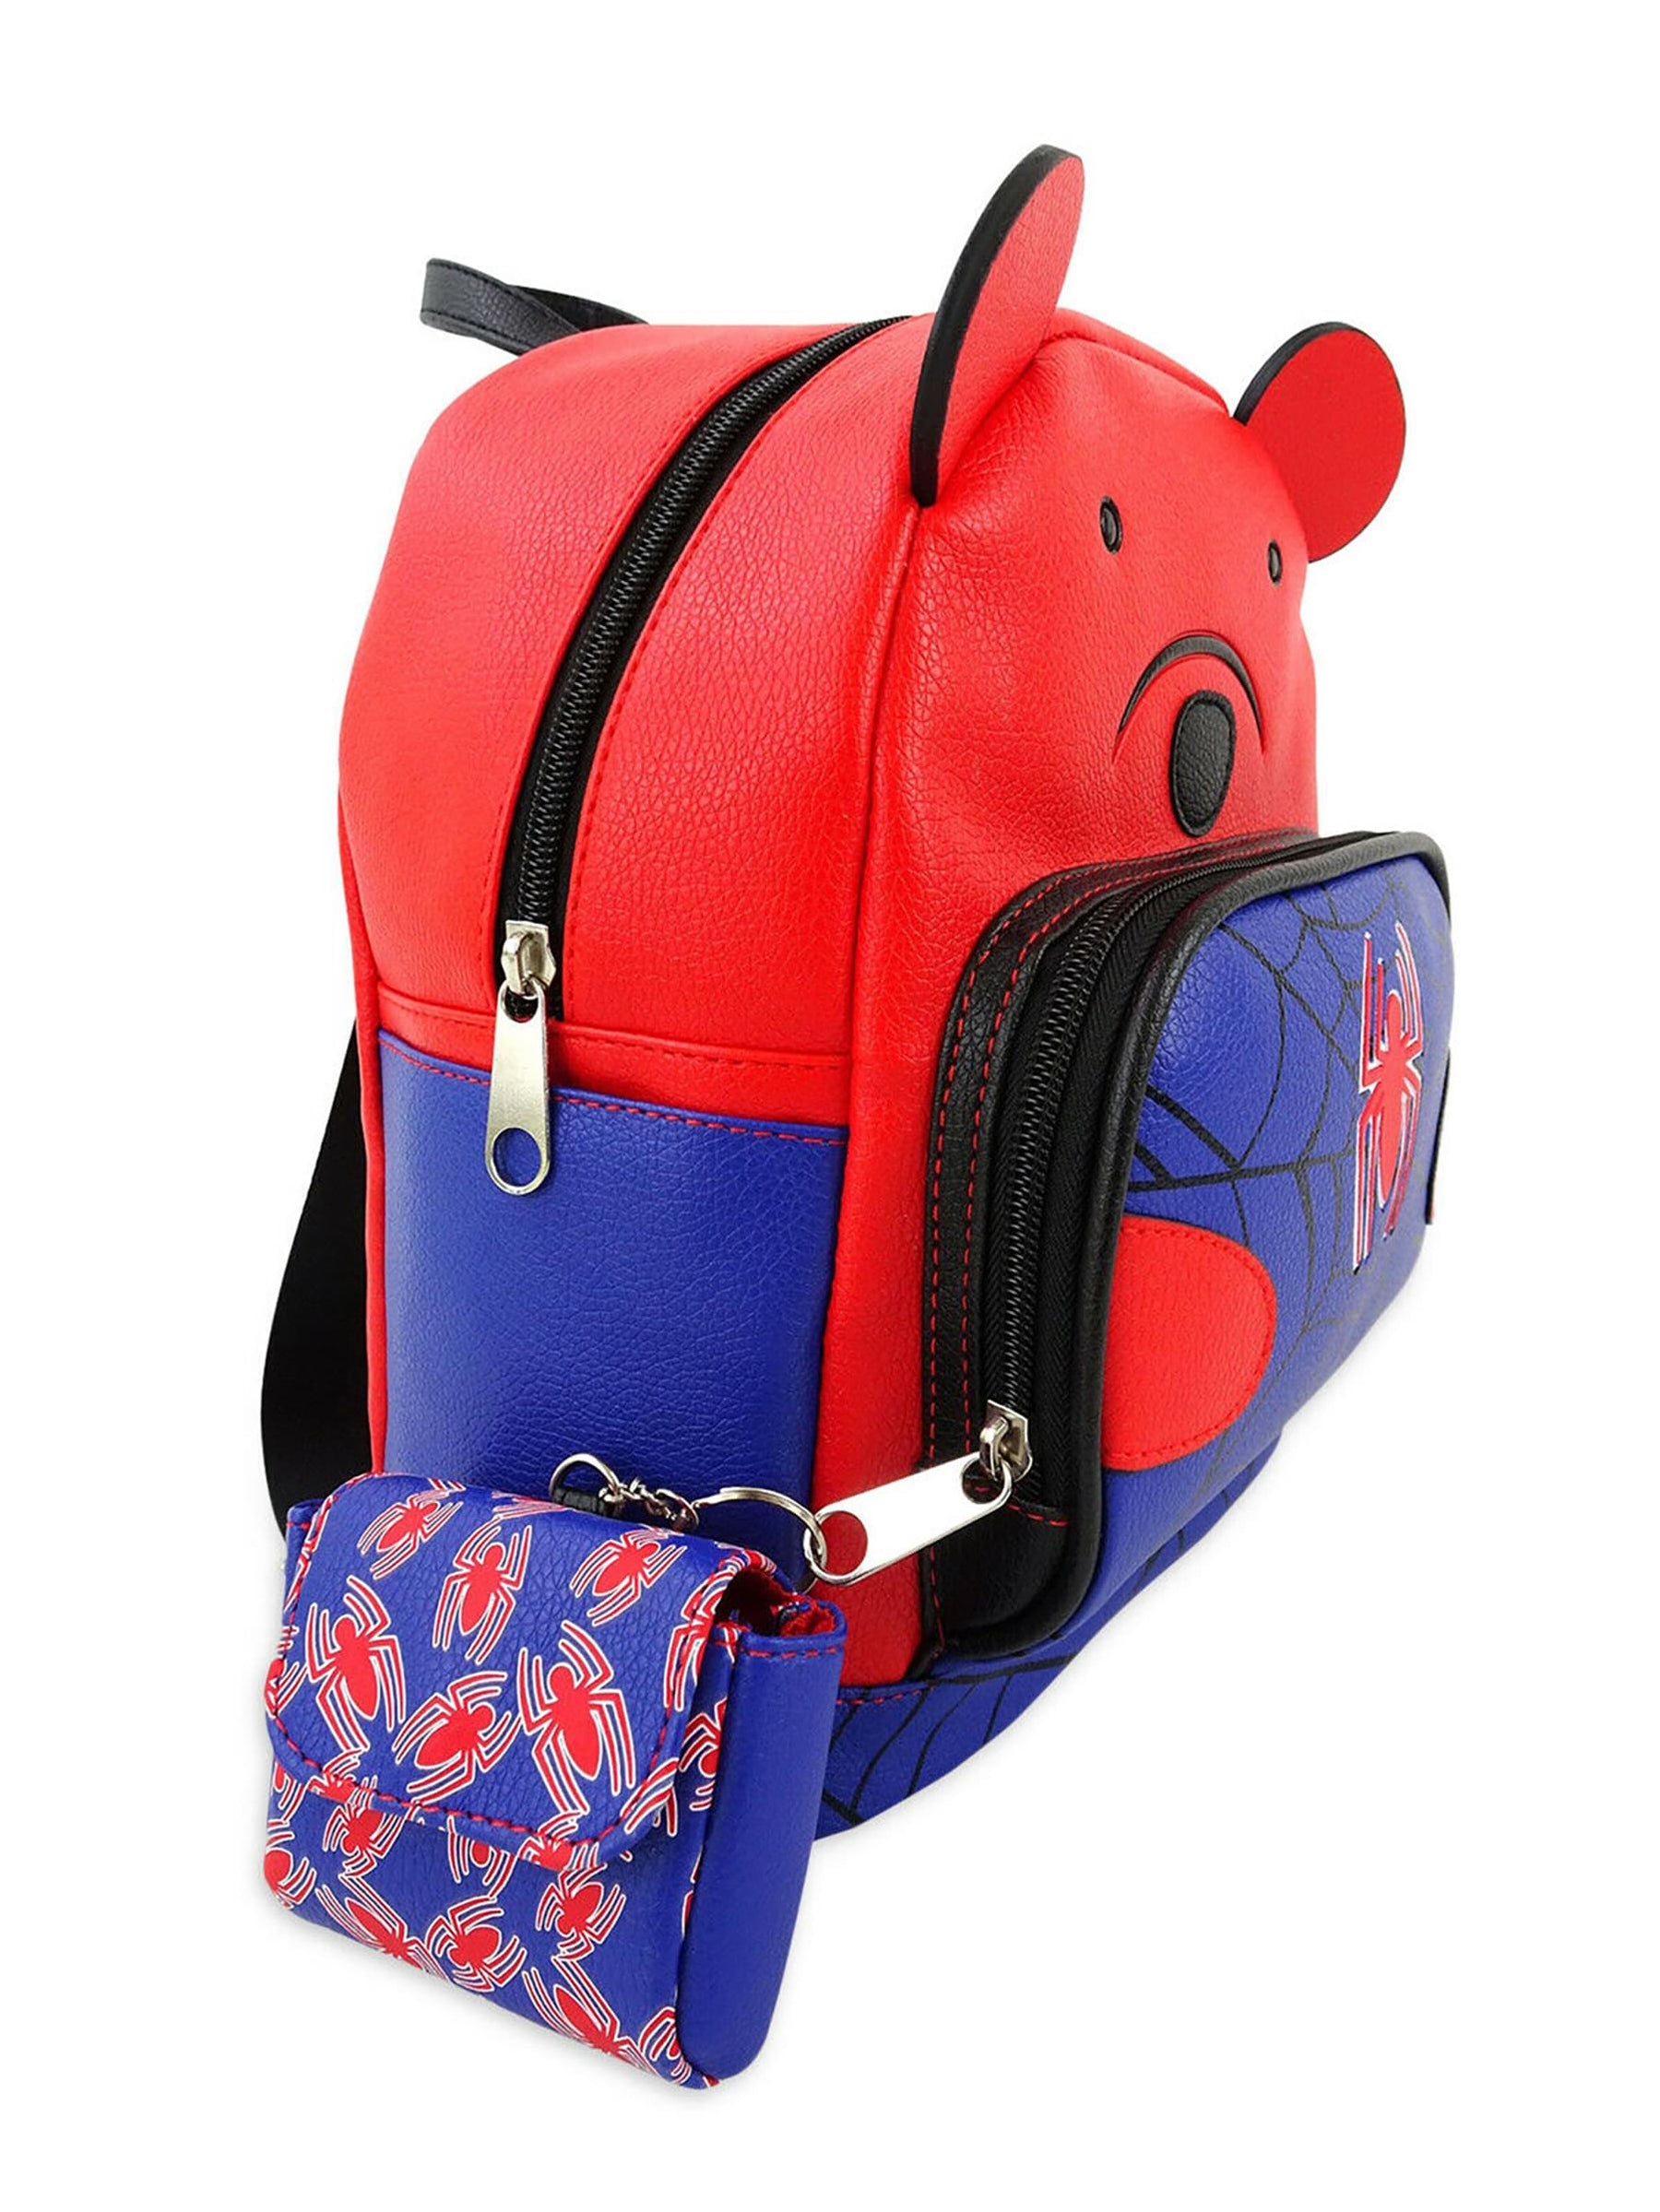 Marvel Spiderman Mini Backpack for Women - Canvas Marvel Spiderman Backpack  Purse Shoulder Bag for Adults, Teens : Amazon.in: Fashion